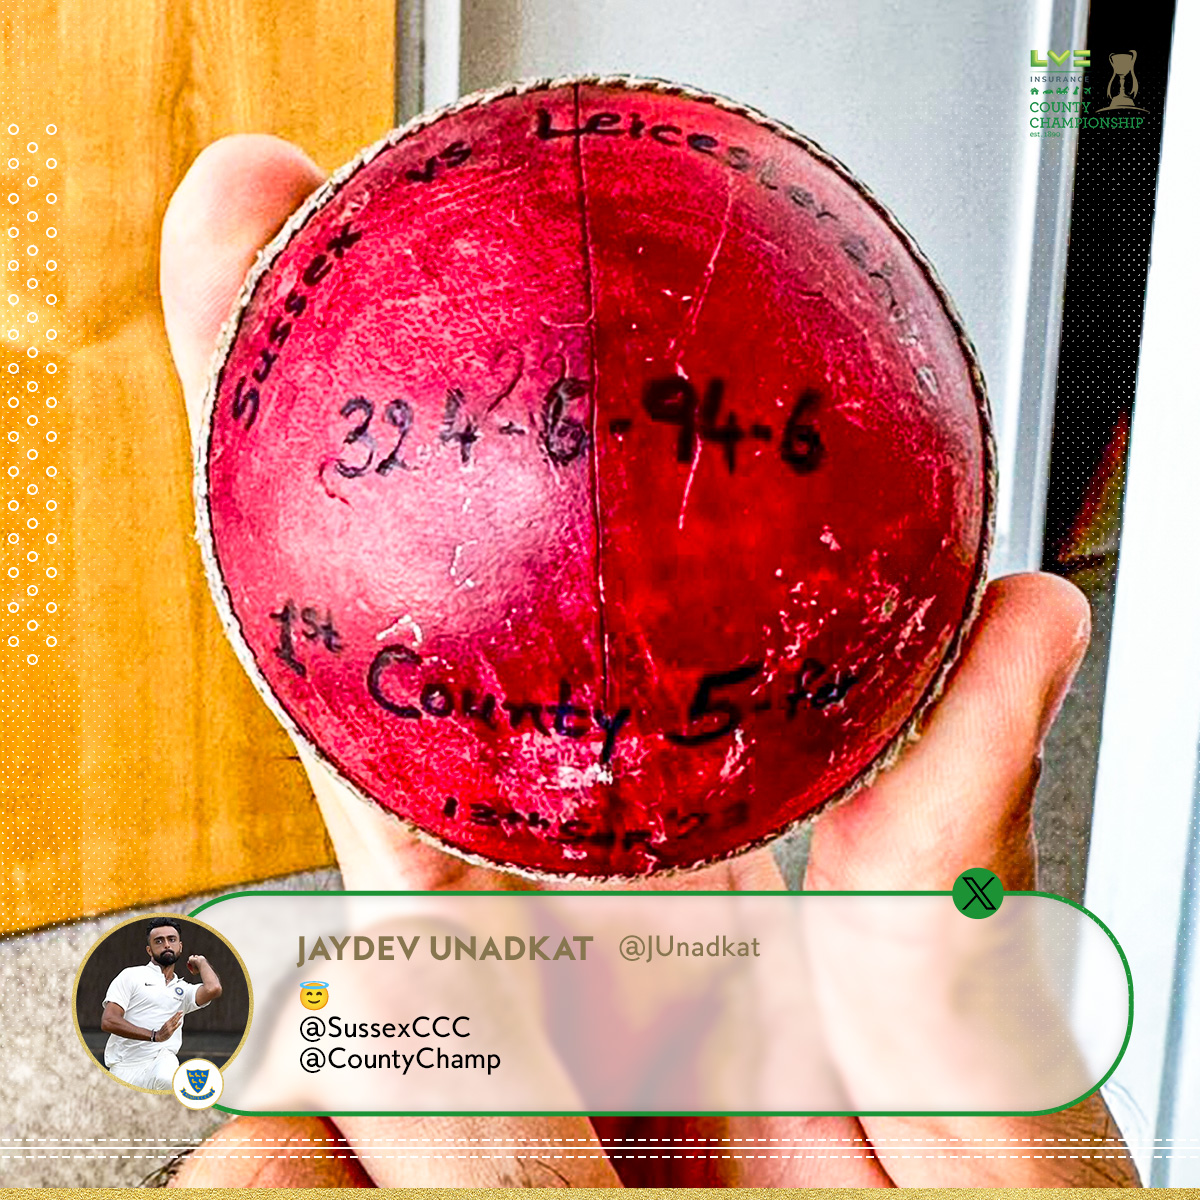 We want to know: What do you do with the ball when you take a five-wicket-haul?